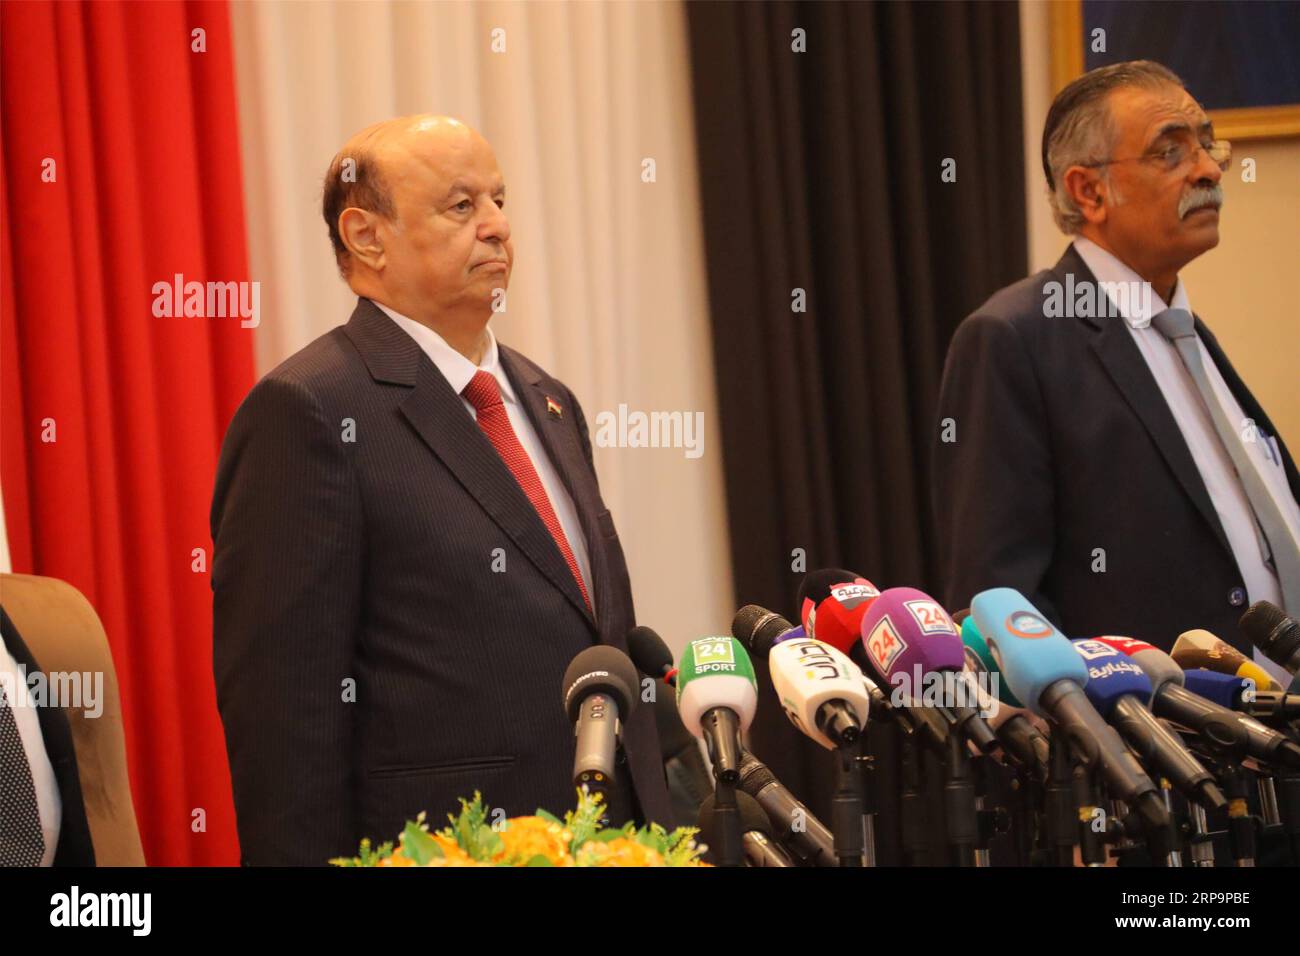 (190413) -- SEIYUN (YEMEN), April 13, 2019 -- Yemeni President Abdu-Rabbu Mansour Hadi (L) is seen during the parliamentary session in Seiyun city of Hadramout province, Yemen, on April 13, 2019. Yemen s parliament convened on Saturday in the city of Seiyun, the second largest city in the southeastern province of Hadramout, for the first time since the outbreak of the devastating civil war in the impoverished Arab country in March 2015. ) YEMEN-SEIYUN-PARLIAMENT MEETING IsmailxRabidhy PUBLICATIONxNOTxINxCHN Stock Photo